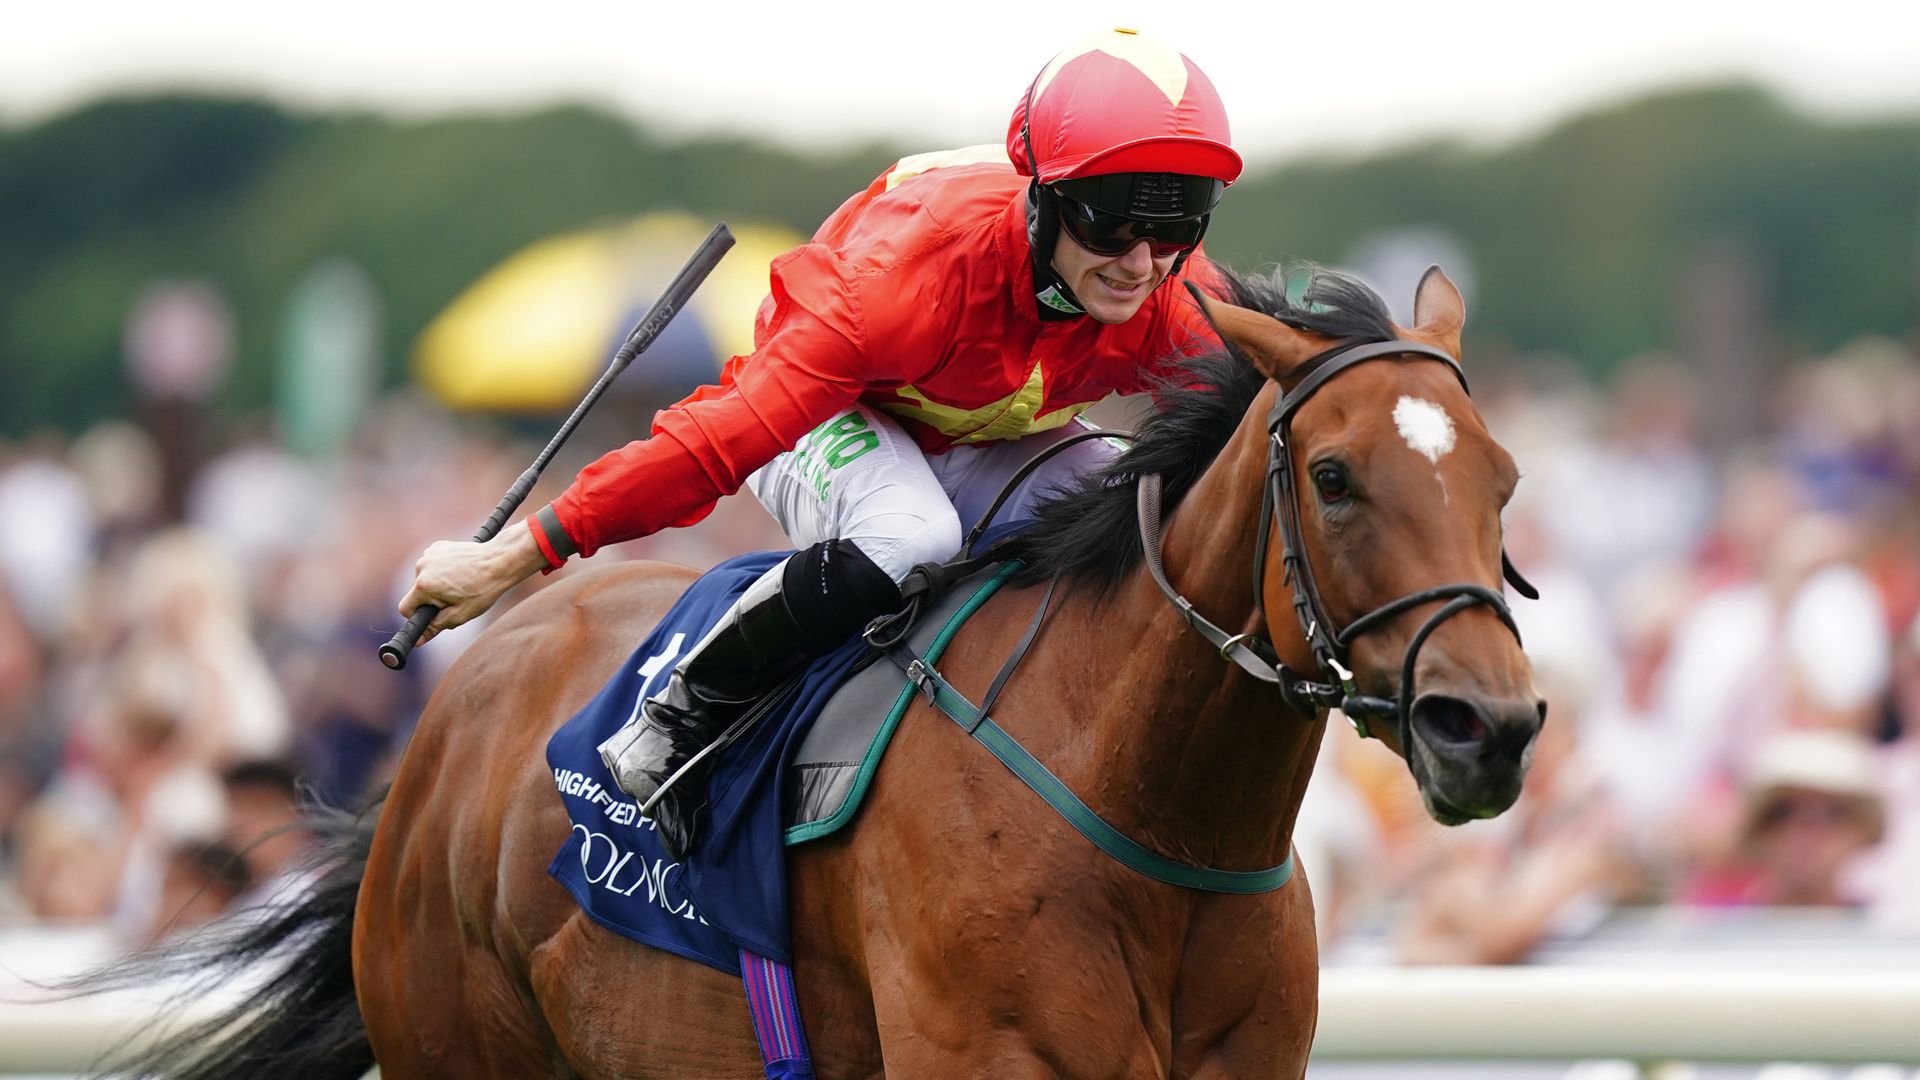 Highfield Princess to stay in training with Quinn plotting Royal Ascot return